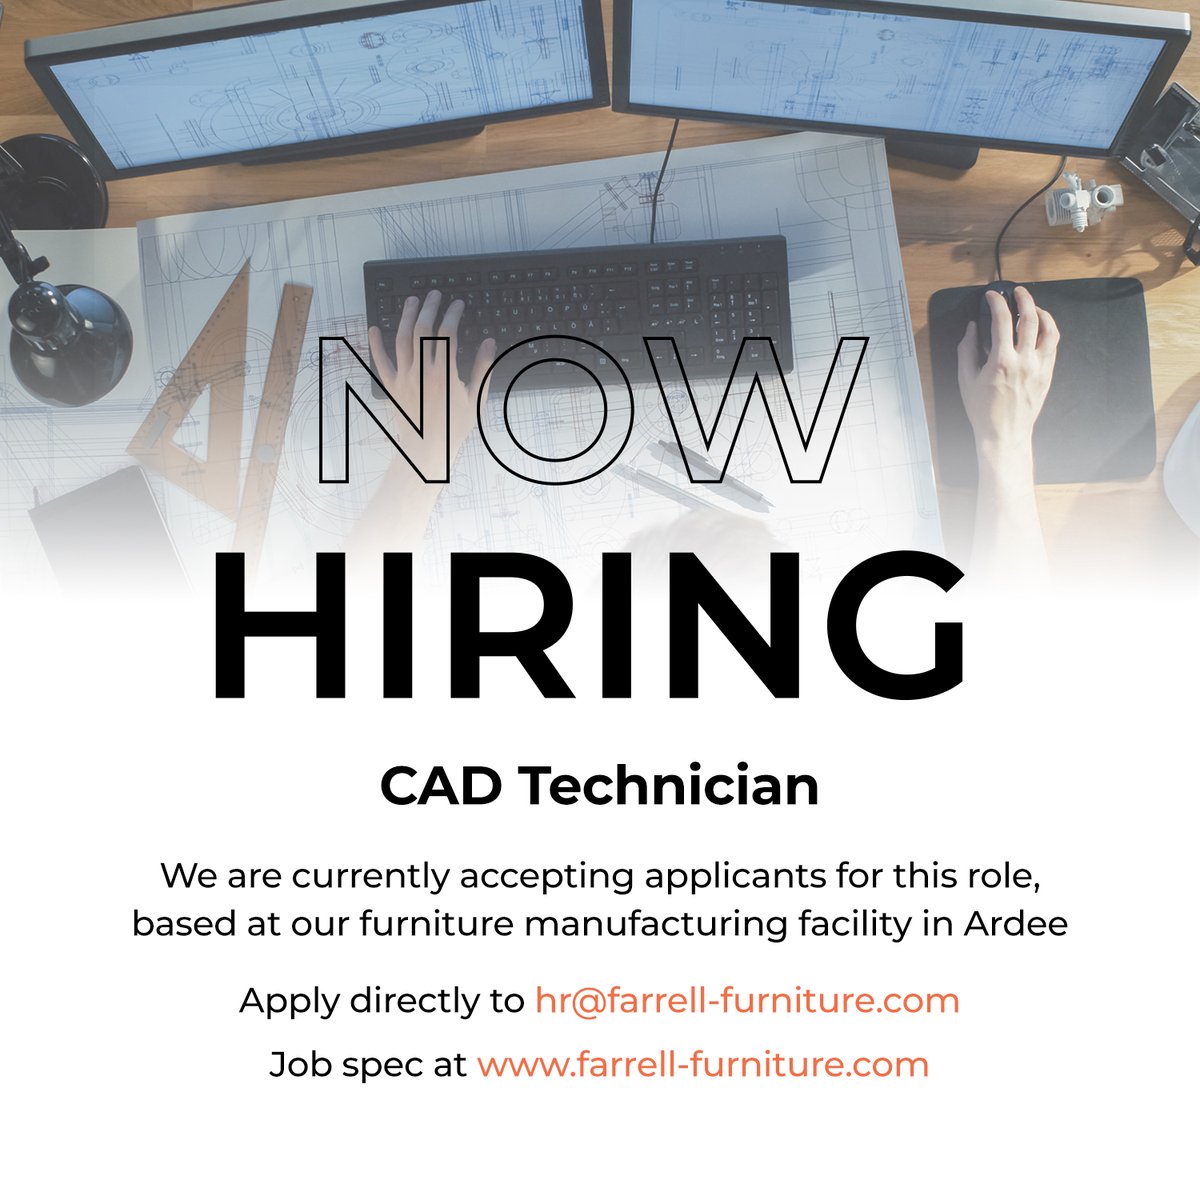 We're hiring a CAD Technician. 
Interested in joining the team at Farrell? 
Click the link below for full job description. 
farrell-furniture.com/now-hiring-cad… 

#hiring #louthjobs #furnituredesign #cadtechnician